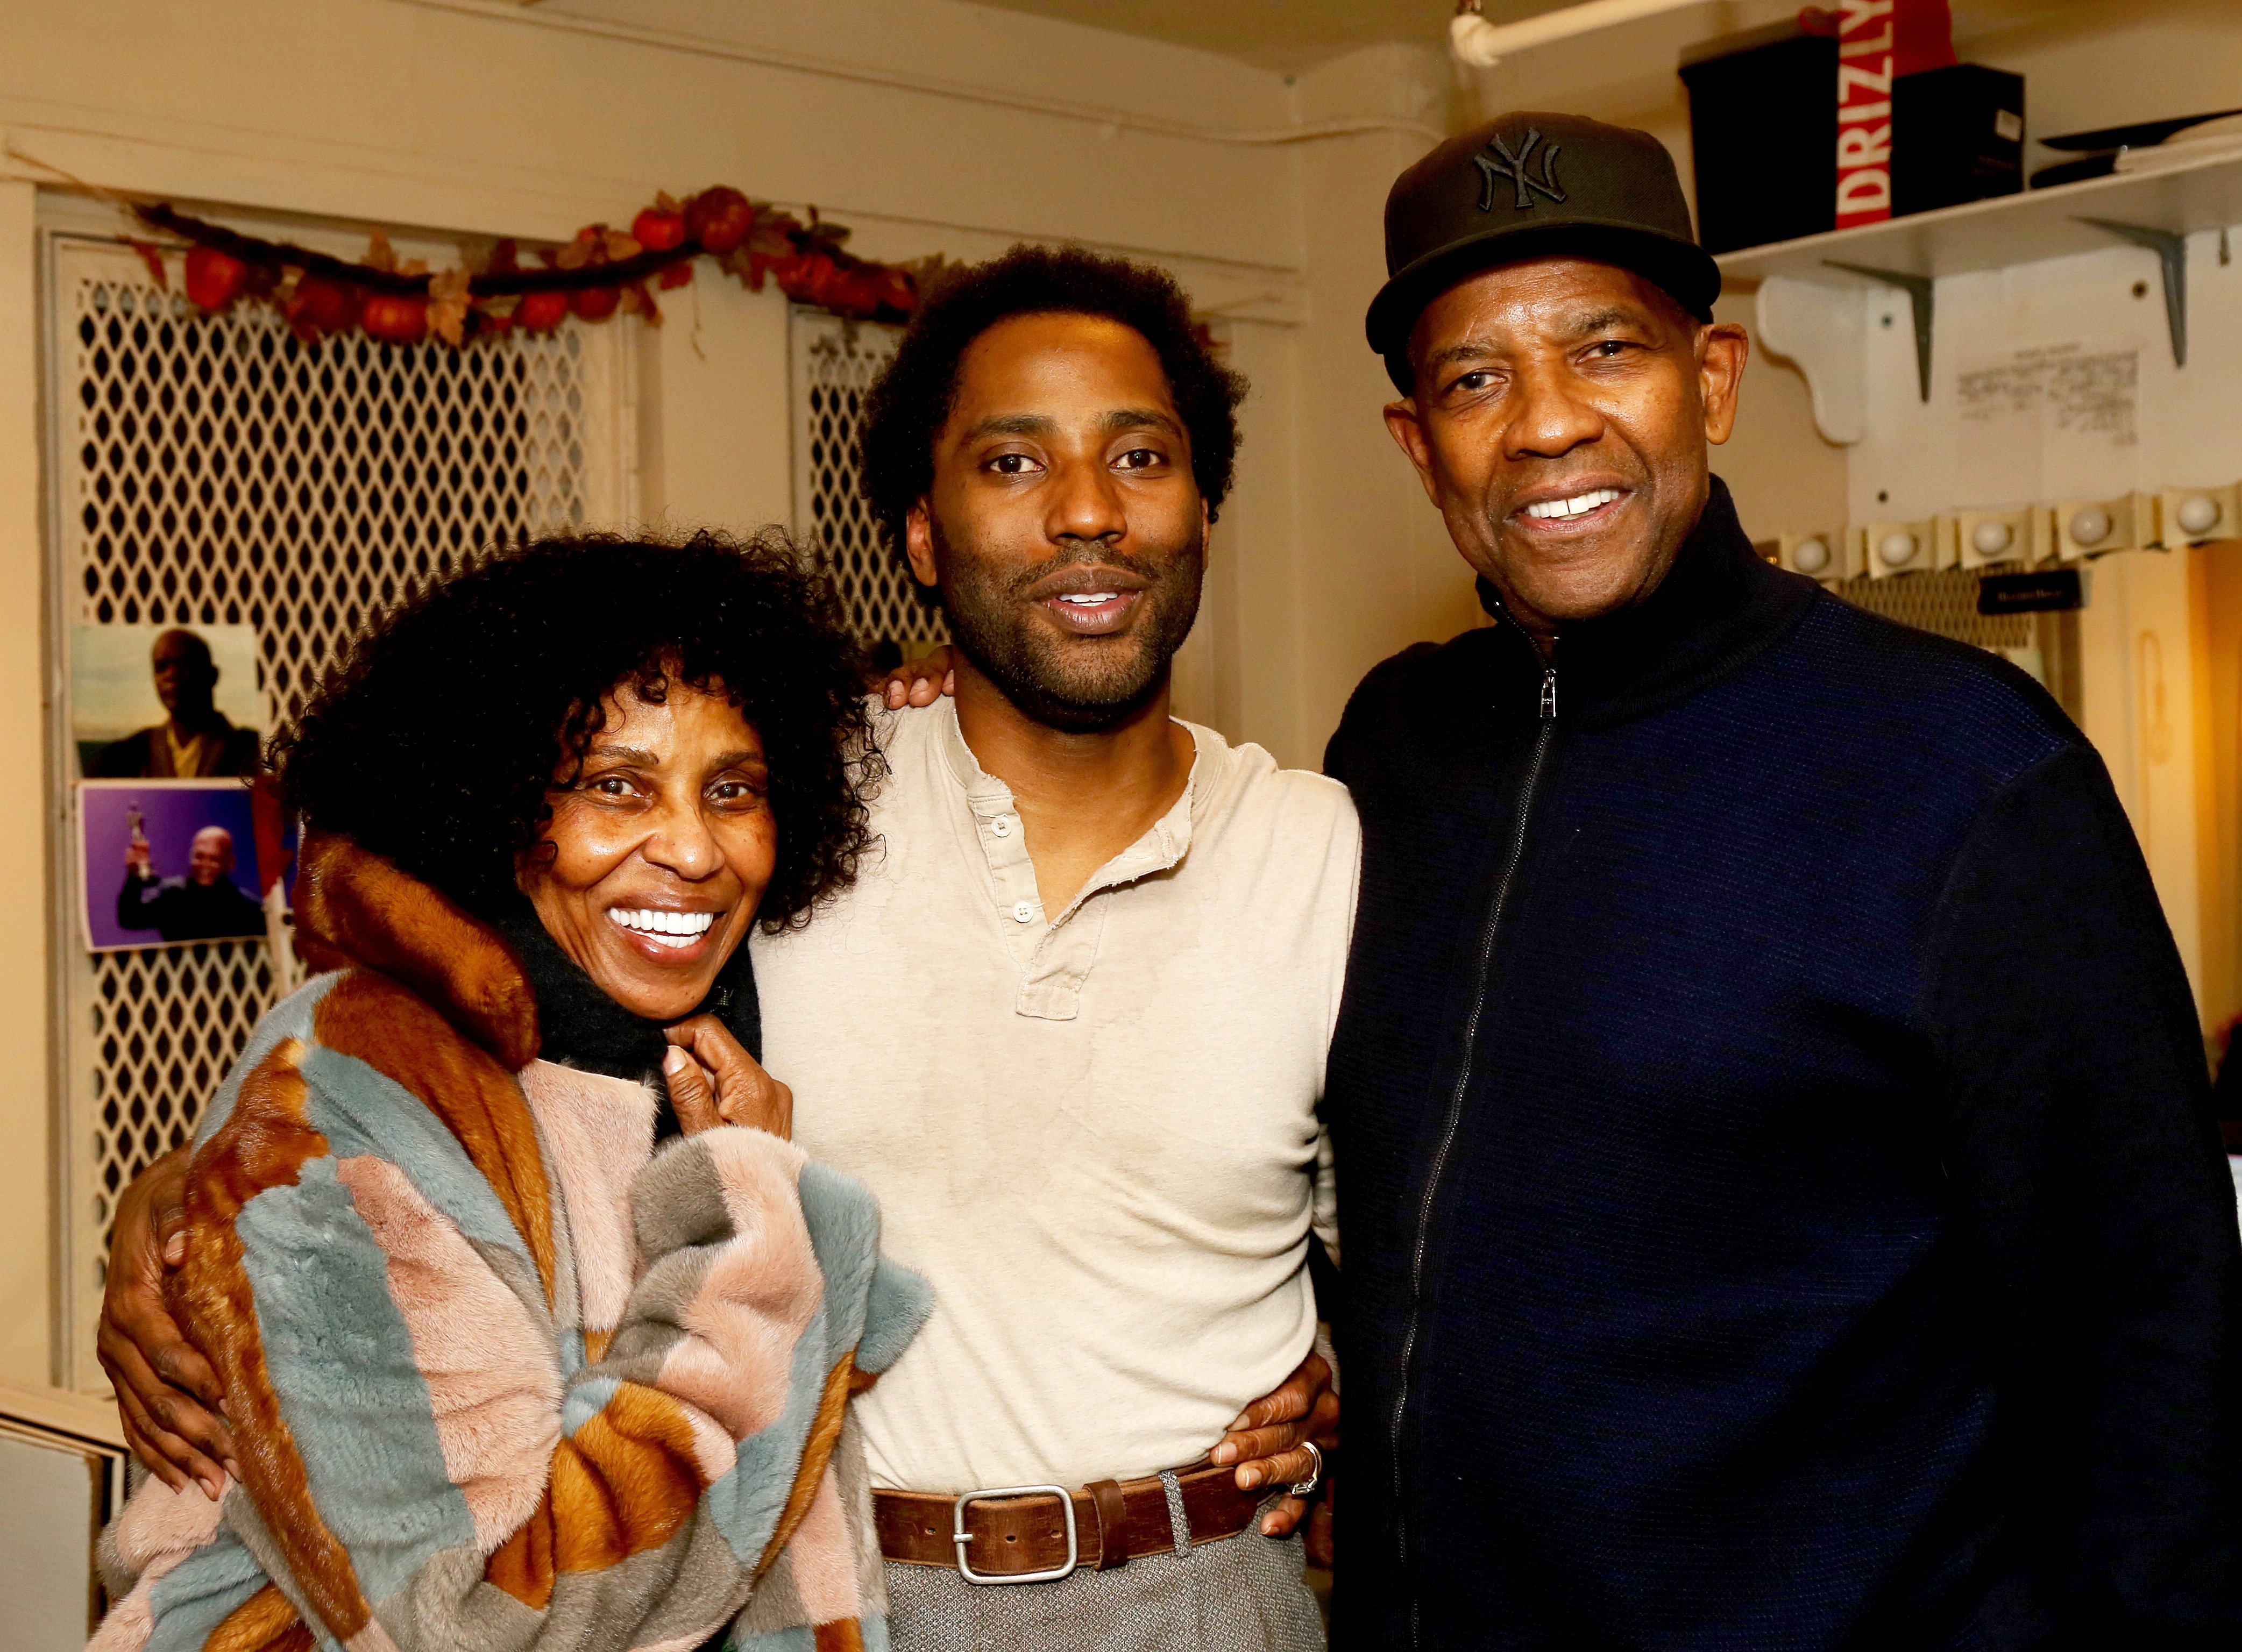 Pauletta Washington, son John Washington and father Denzel Washington pose backstage at the play "The Piano Lesson" on Broadway at The Barrymore Theater on November 18, 2022 in New York City ┃Source: Getty Images